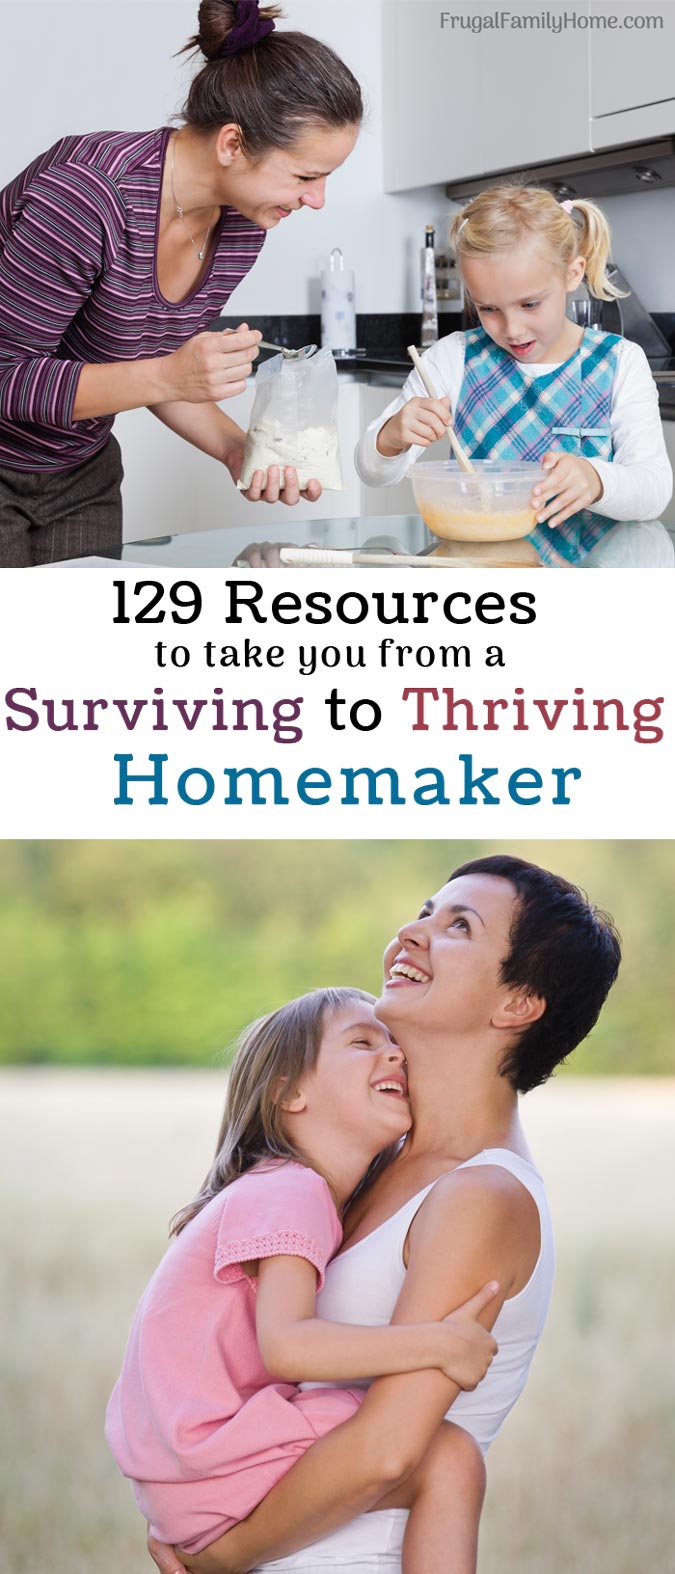 129 resources for the homemaker in the homemaking bundle.